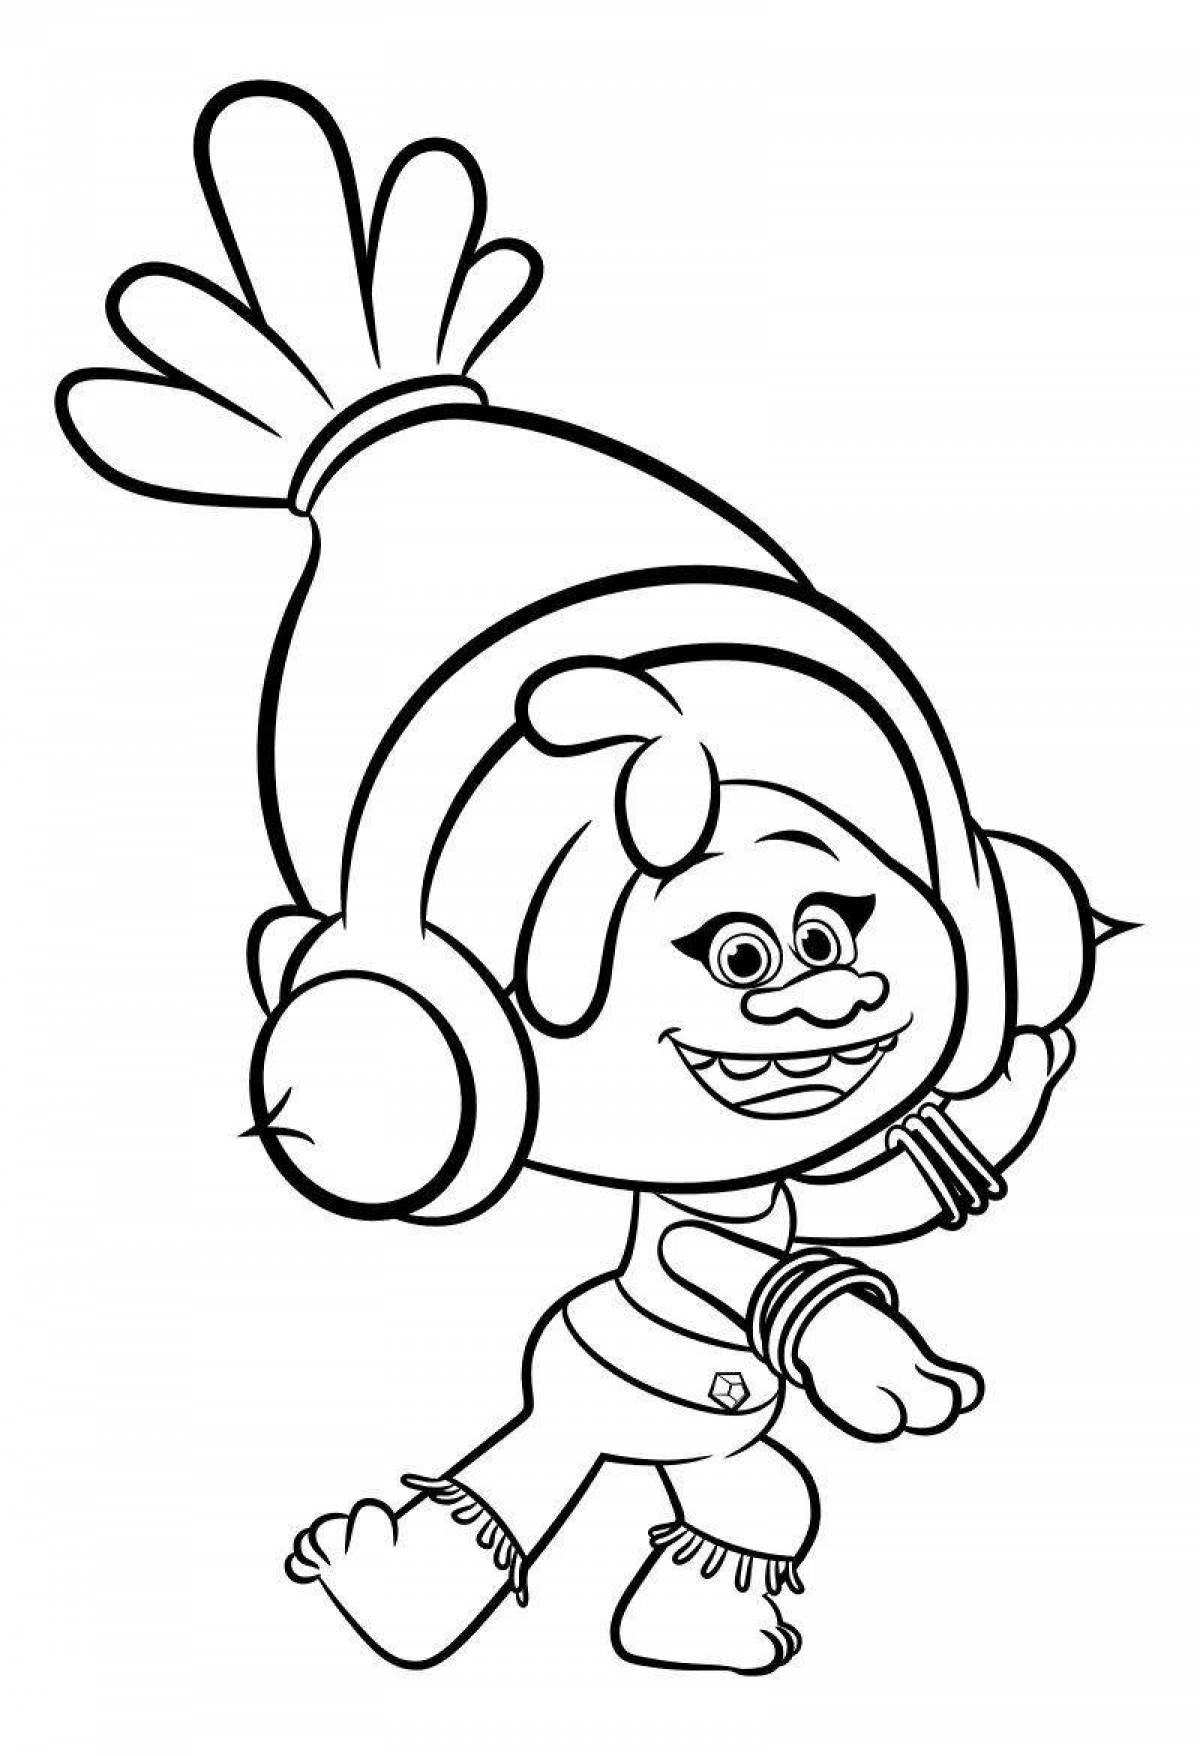 Animated coloring pages for kids trolls